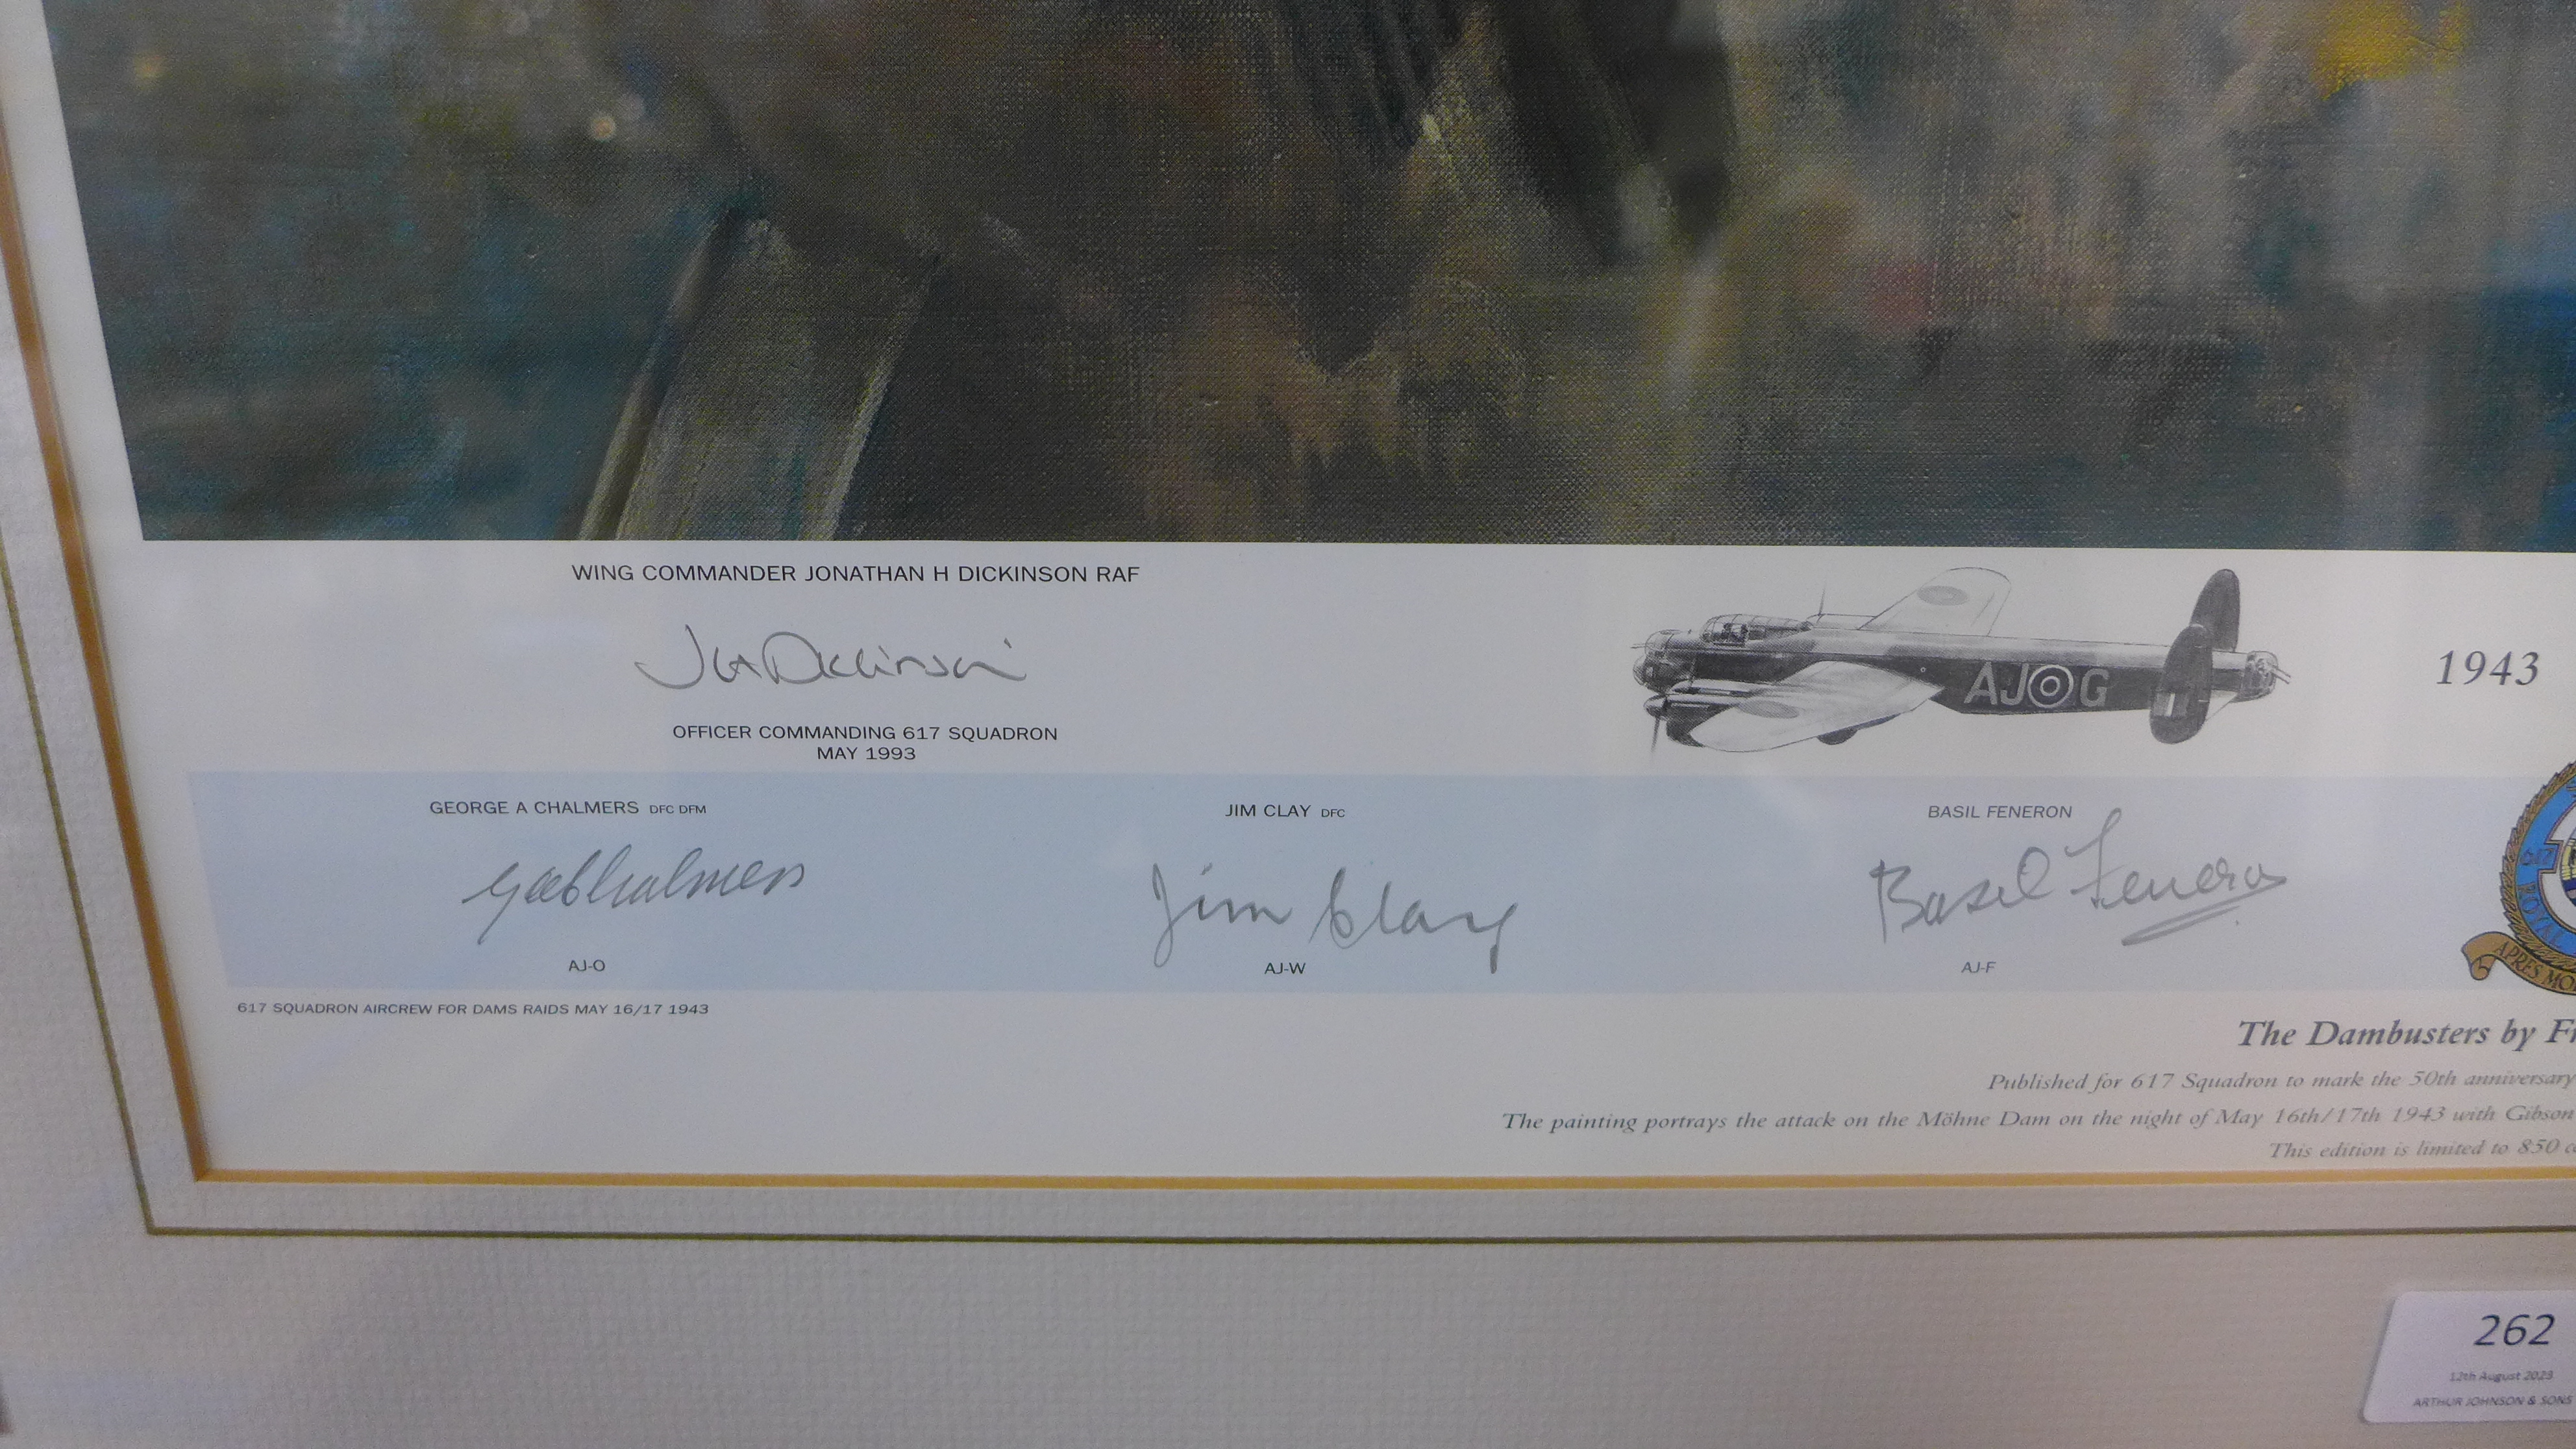 A Frank Wooton print, The Dambusters, signed by the artist and 617 Squadron crew, framed - Image 2 of 4